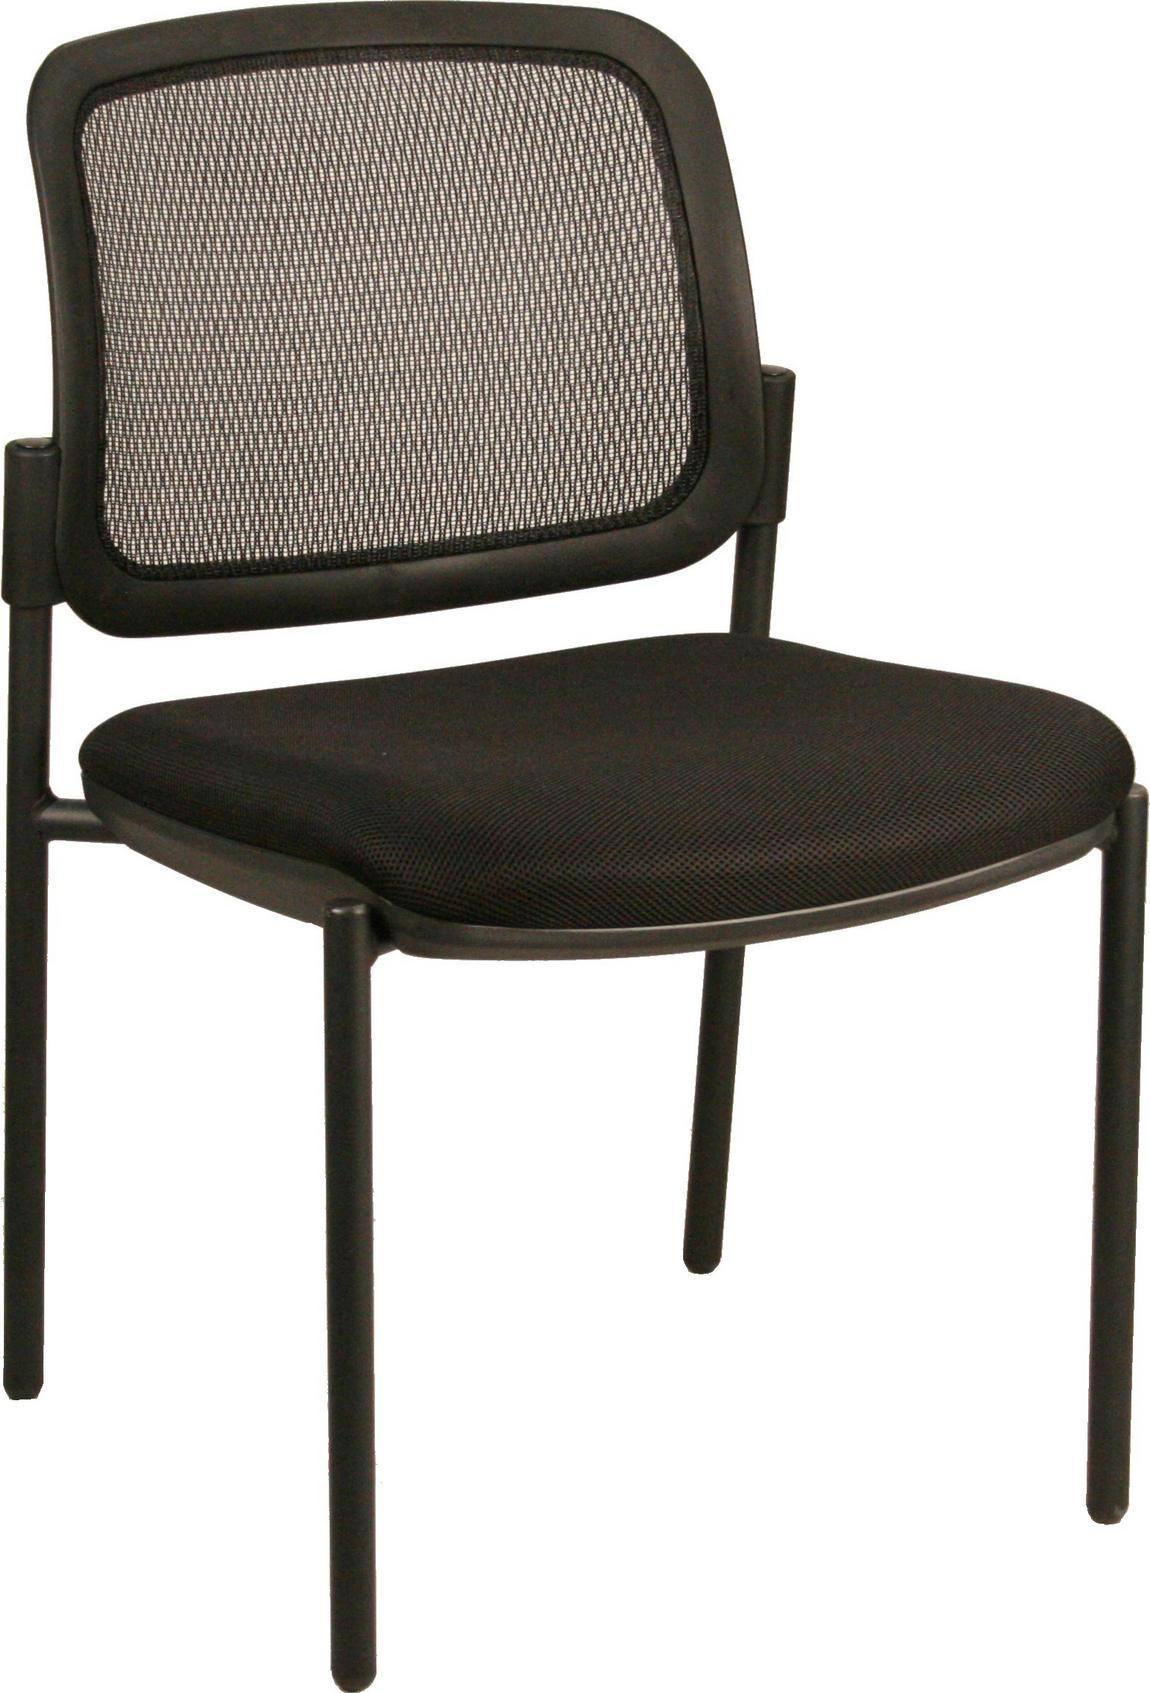 1004 Mesh Stacking Chair Without Arms 1 